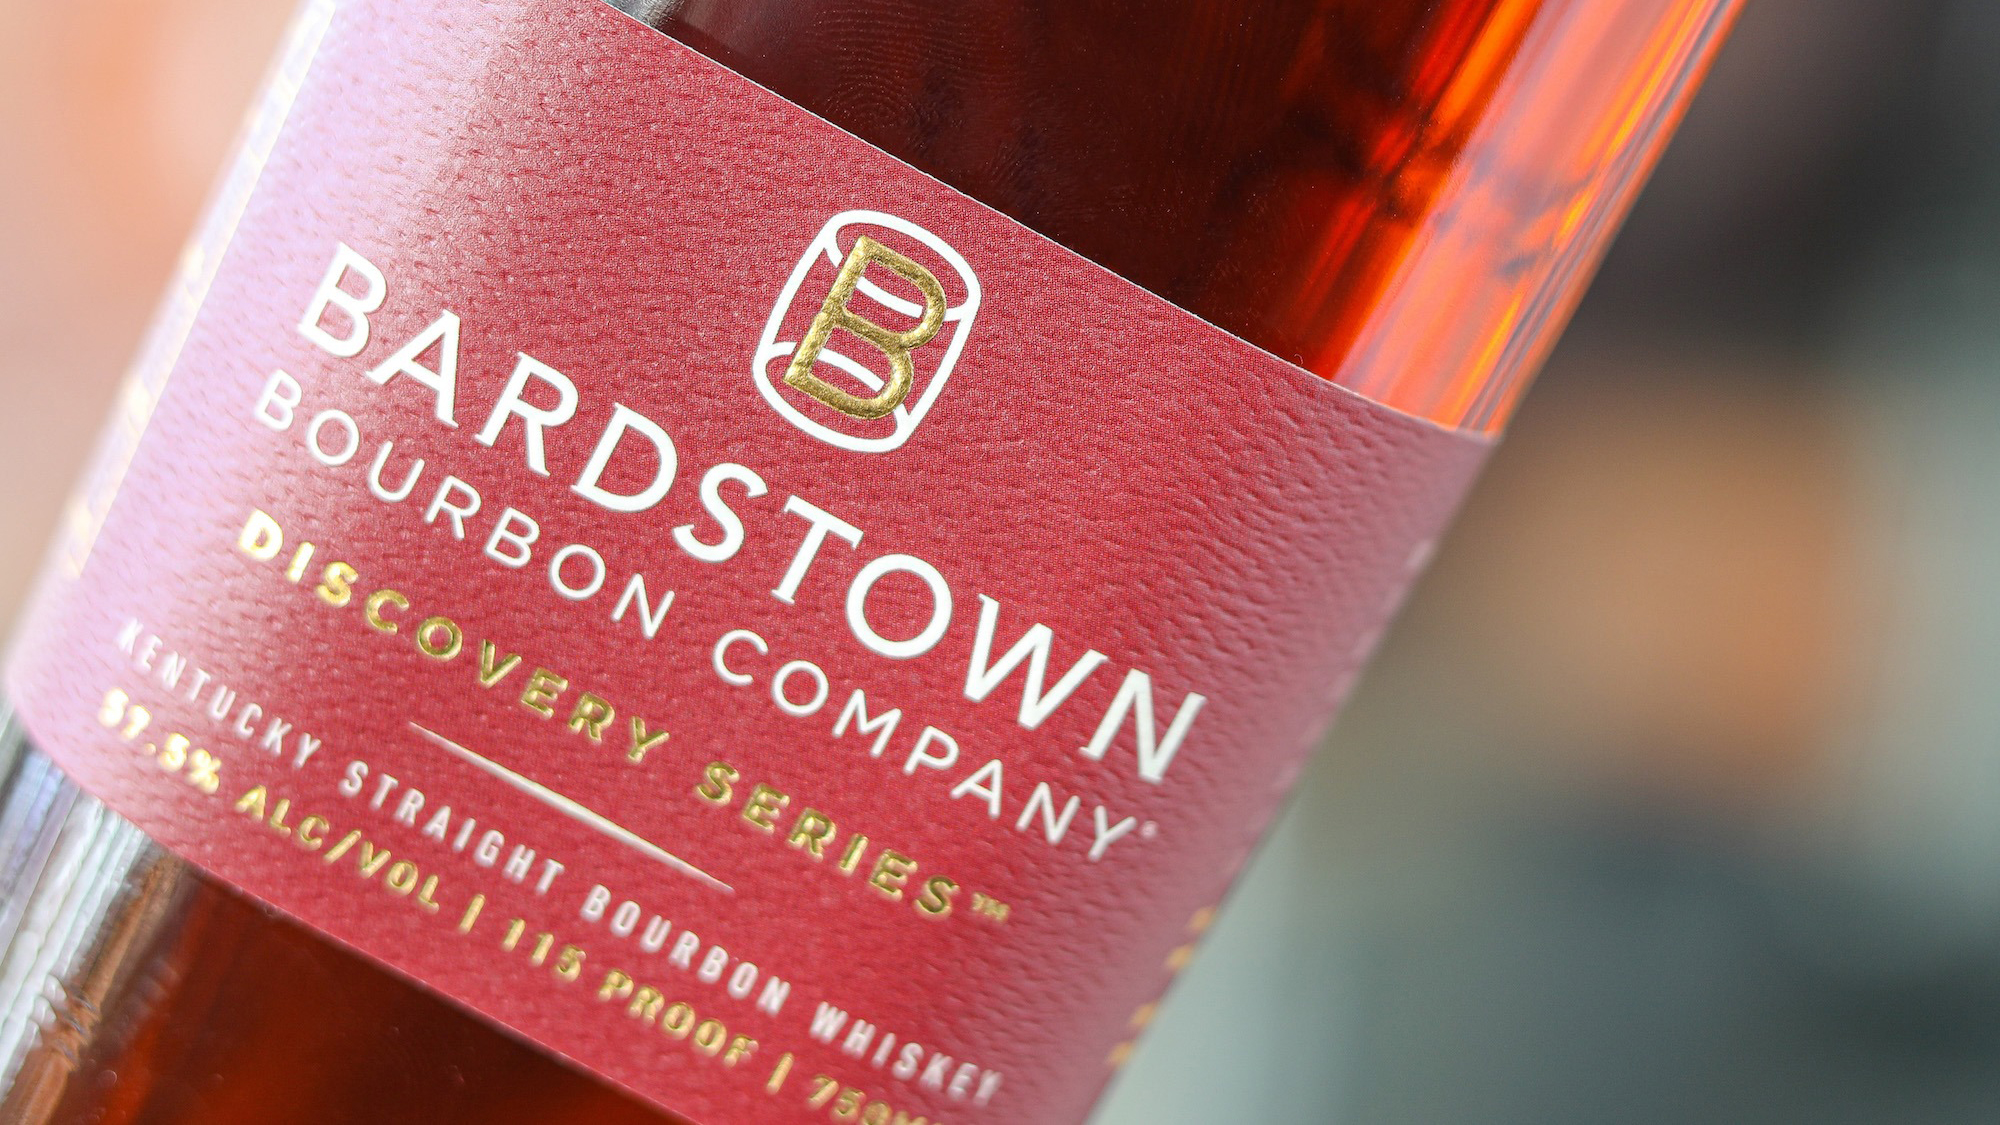 Bardstown Bourbon Unveils Second Phifer Pavitt Wine Whiskey, Fusion Series 4 and Discovery Series 4